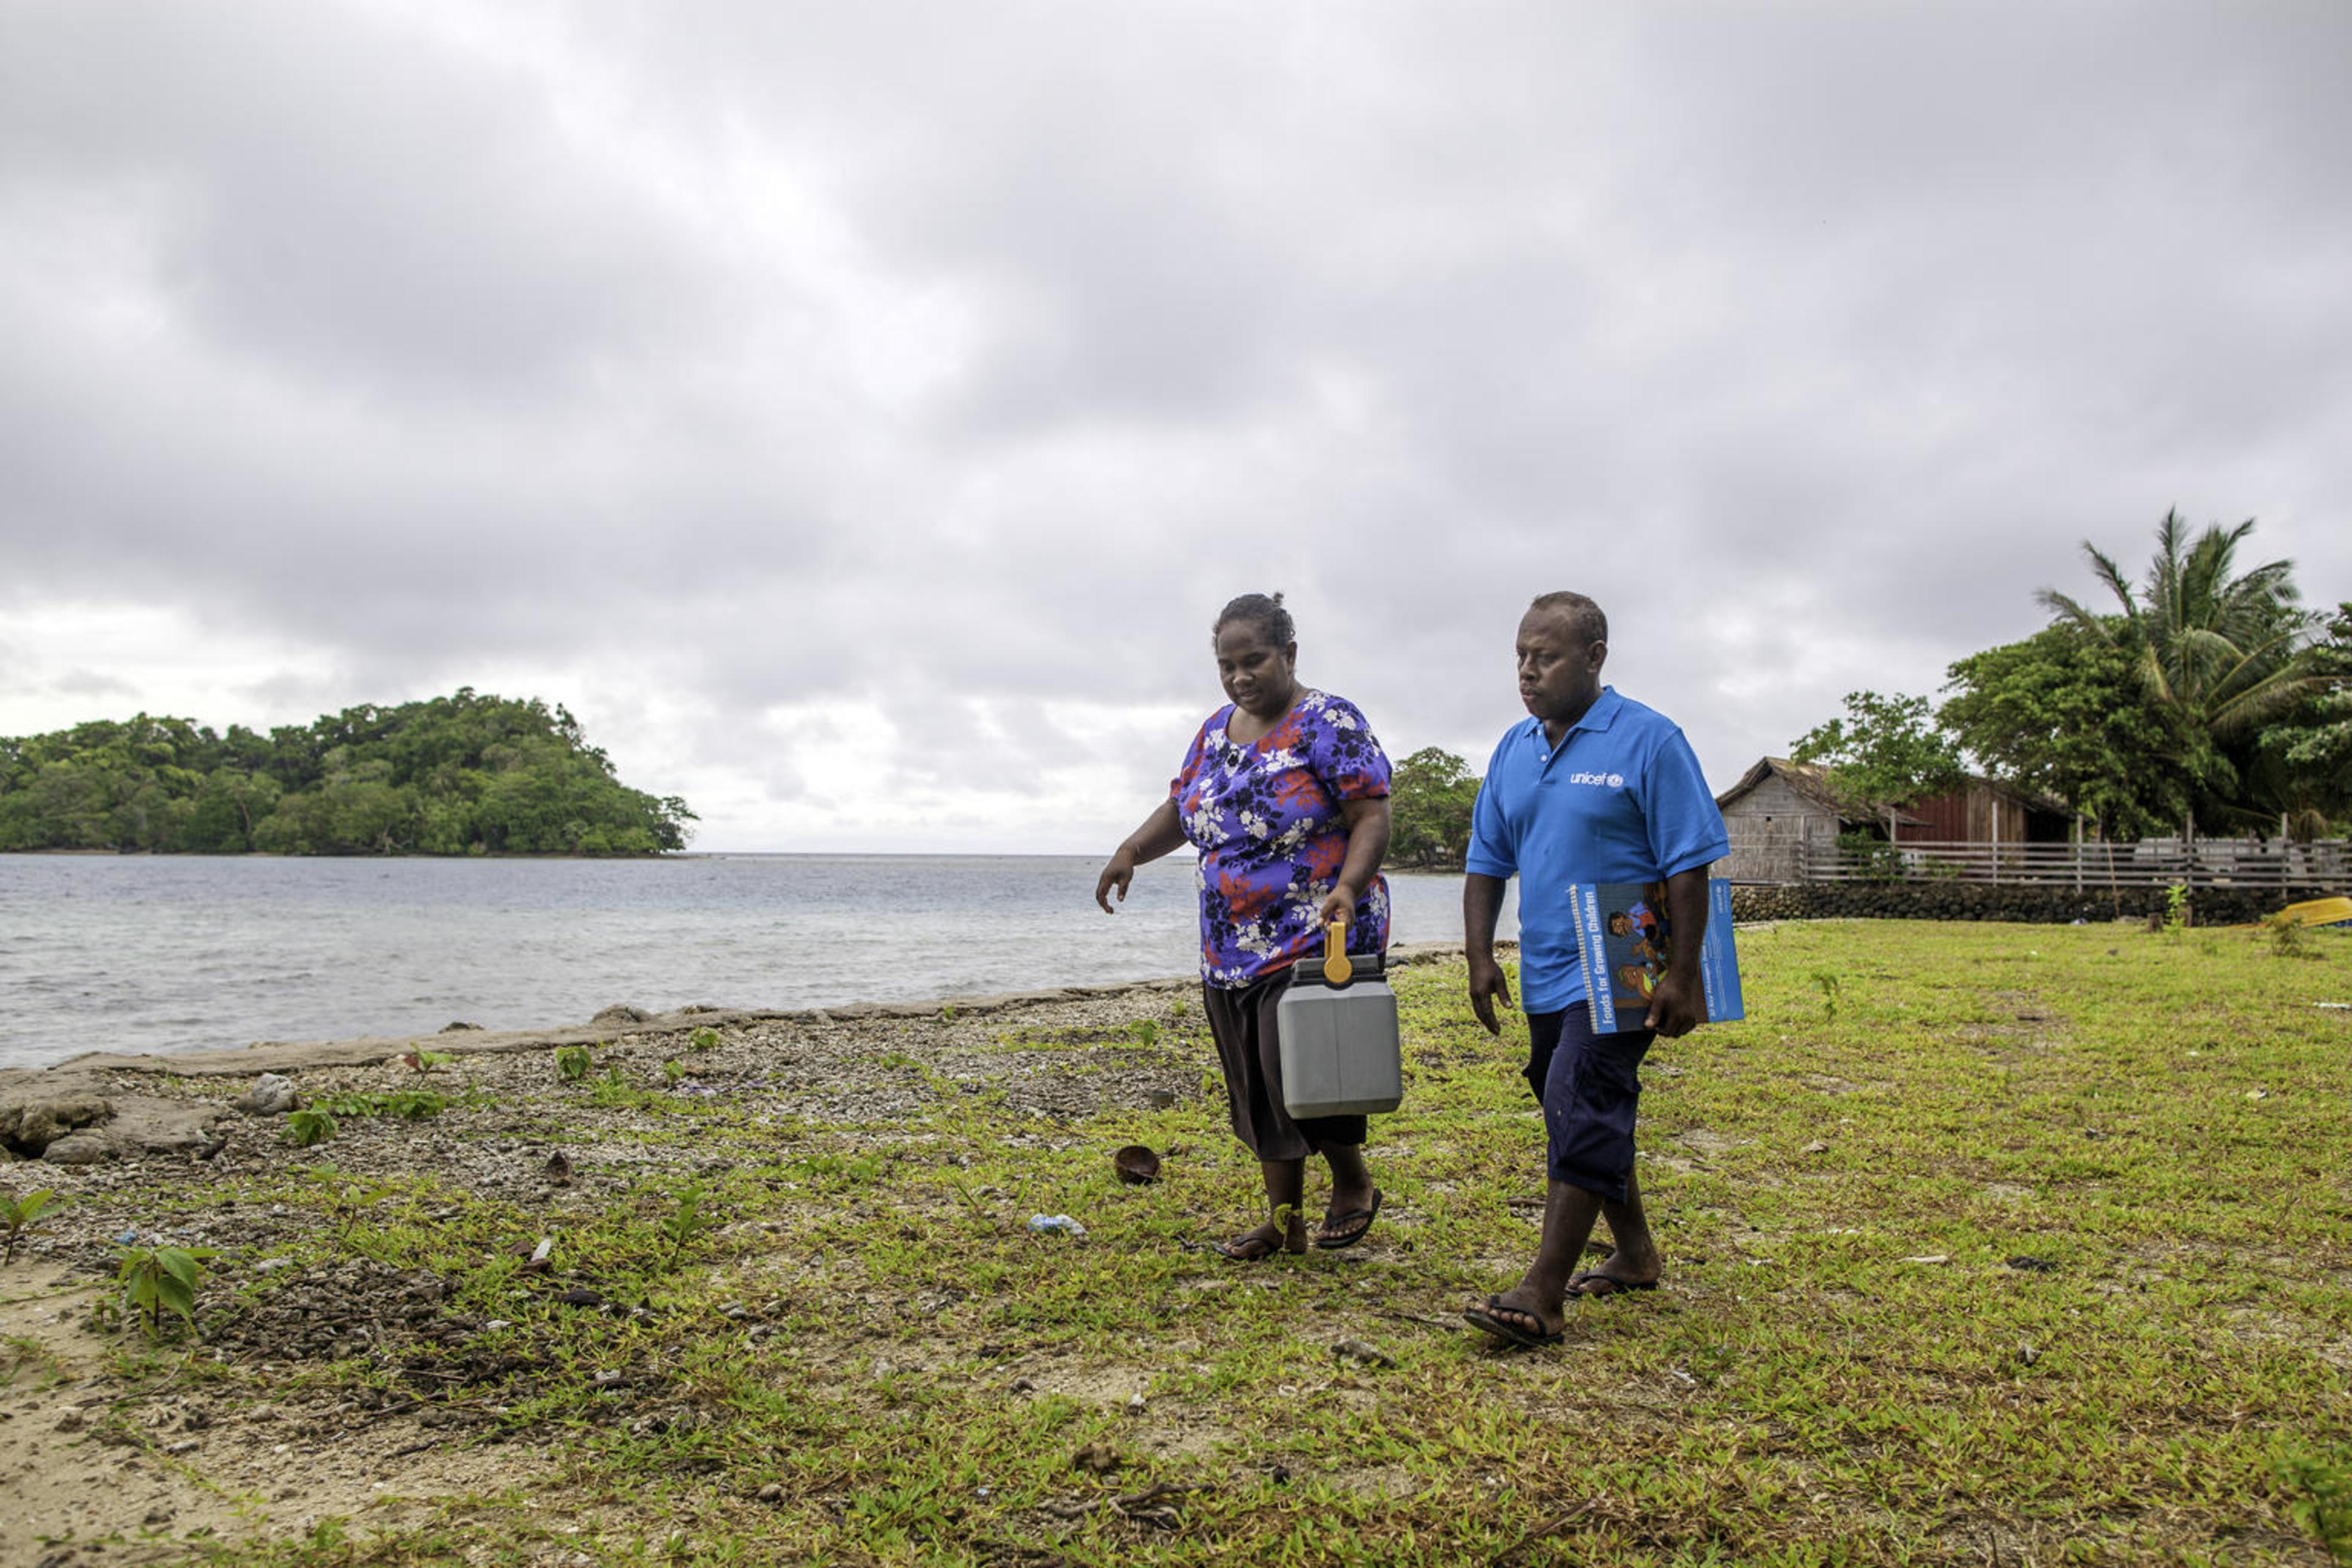 UNICEF Health Worker Paul Maesiala goes the extra mile to reach children in the Solomon Islands